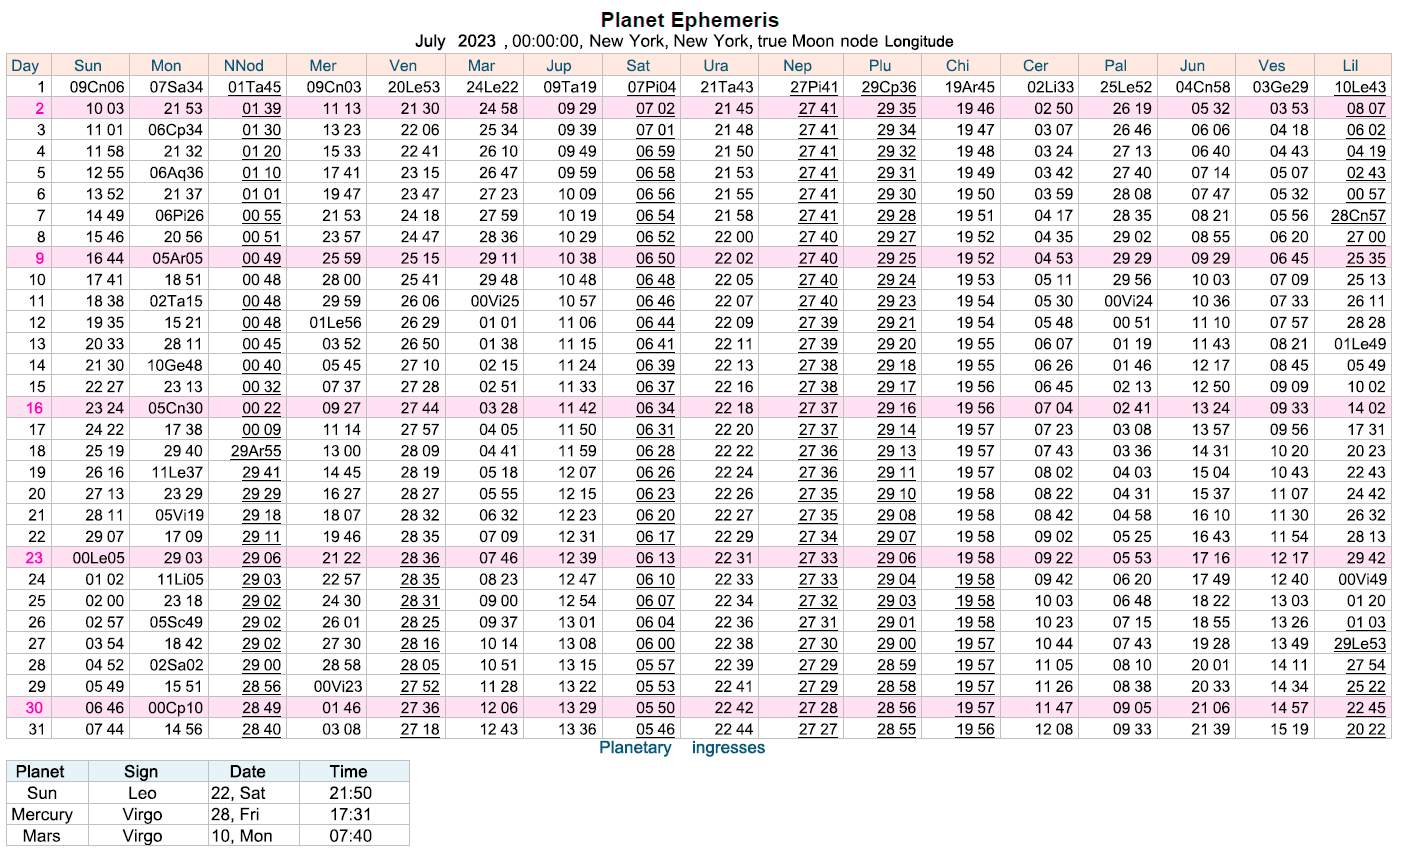 ephemeris listing daily positions of the planets in the month of July 2023